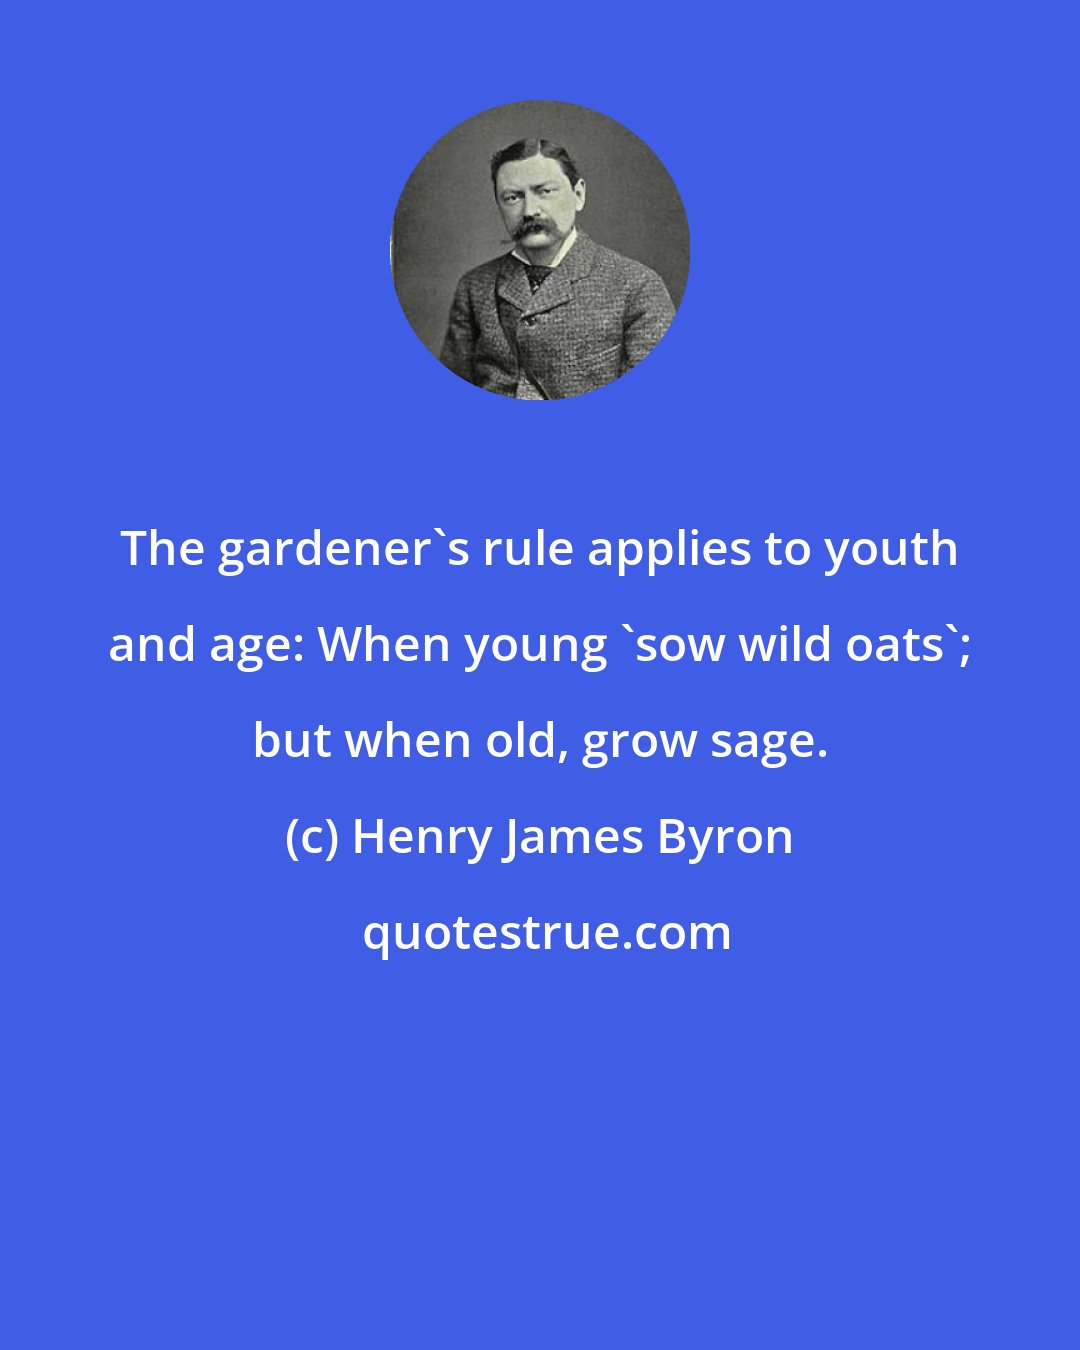 Henry James Byron: The gardener's rule applies to youth and age: When young 'sow wild oats'; but when old, grow sage.